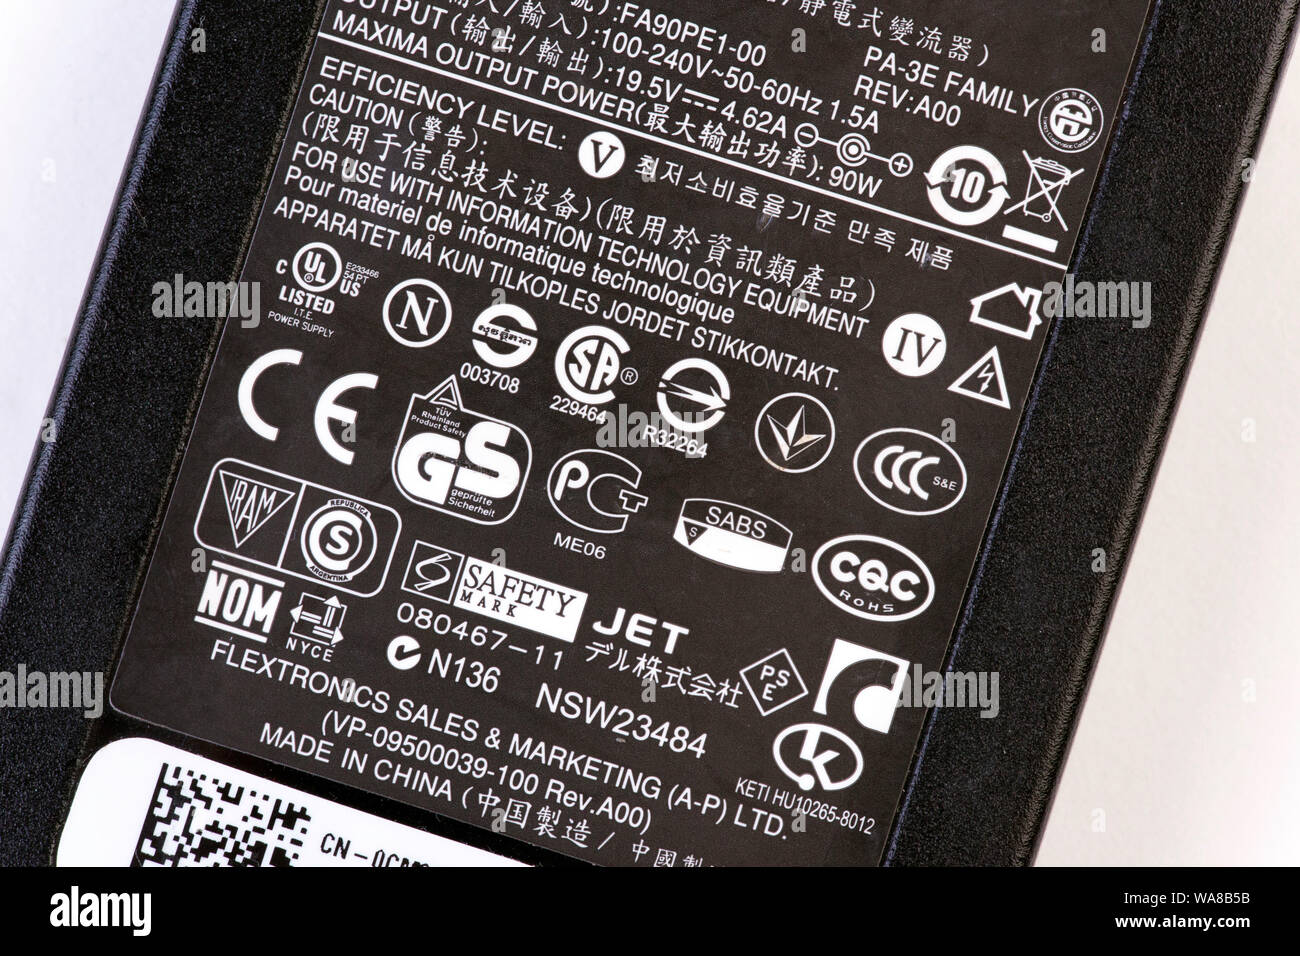 electrical safety standards logos on laptop mains power adaptor Stock Photo